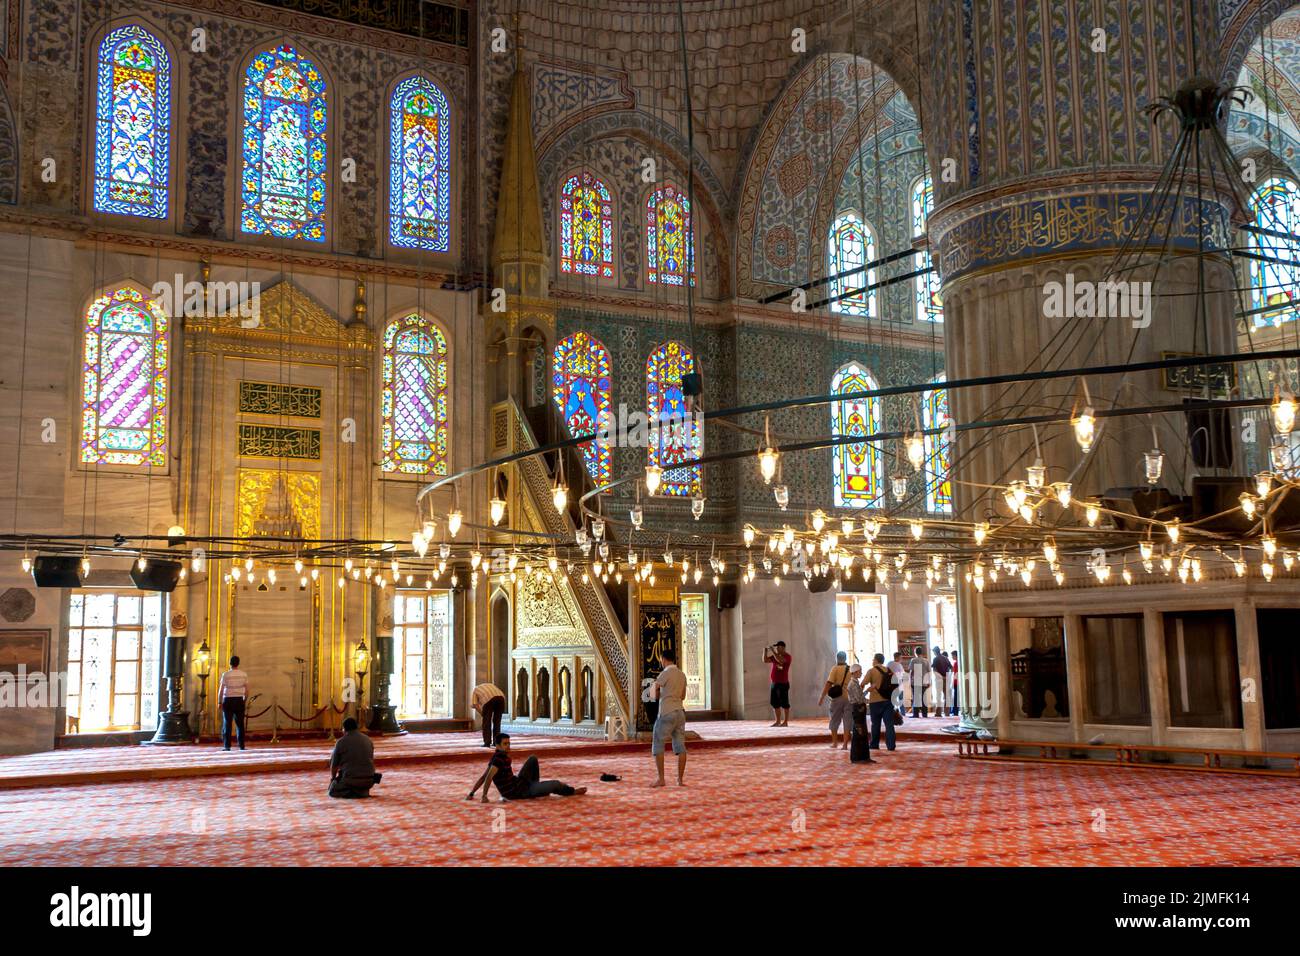 A view inside the Blue Mosque or Sultan Ahmet Camii at Istanbul in Turkey showing the minbar and stained glass windows. Stock Photo